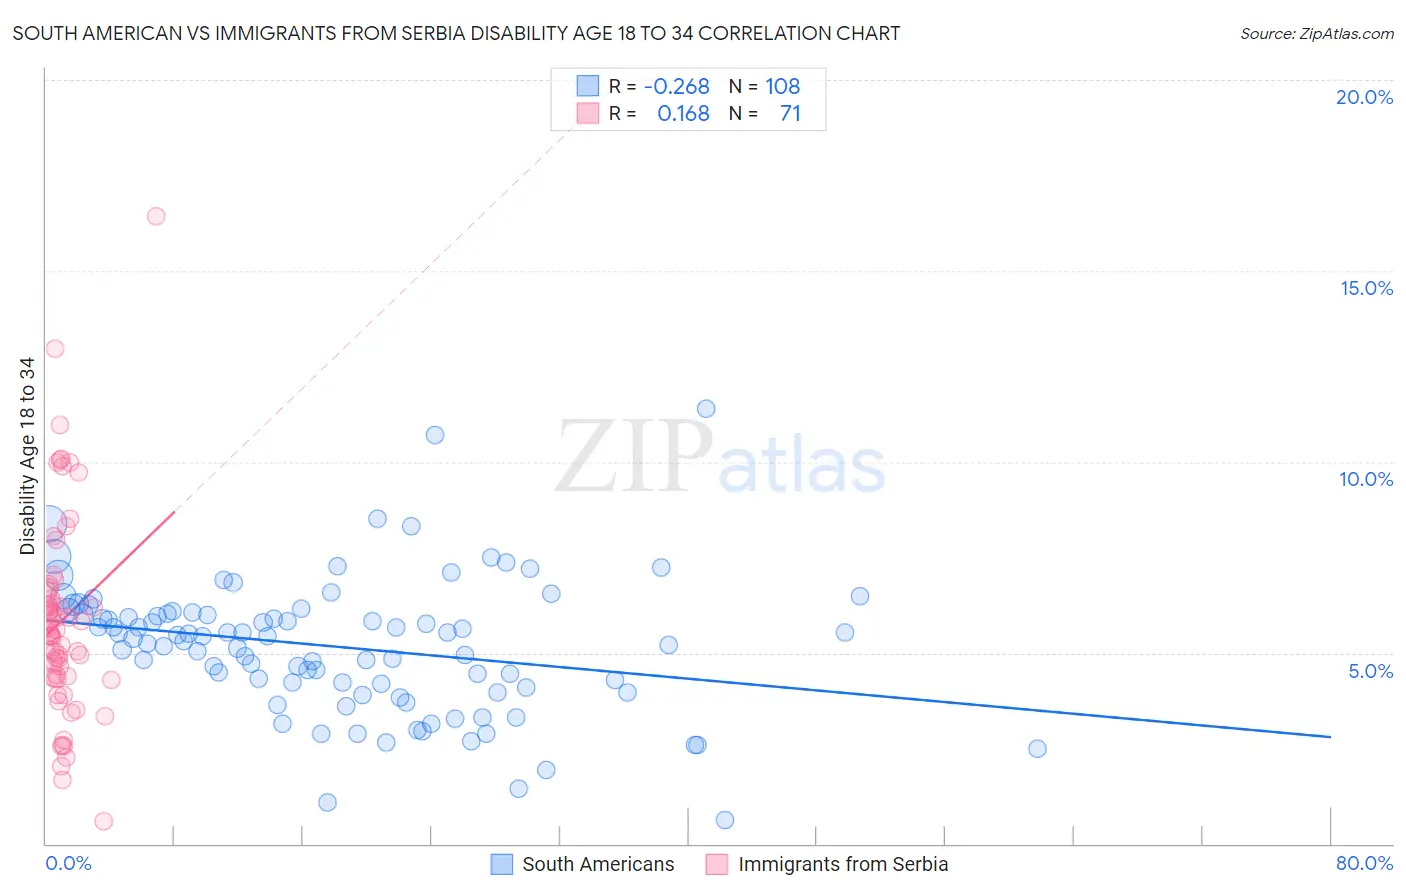 South American vs Immigrants from Serbia Disability Age 18 to 34